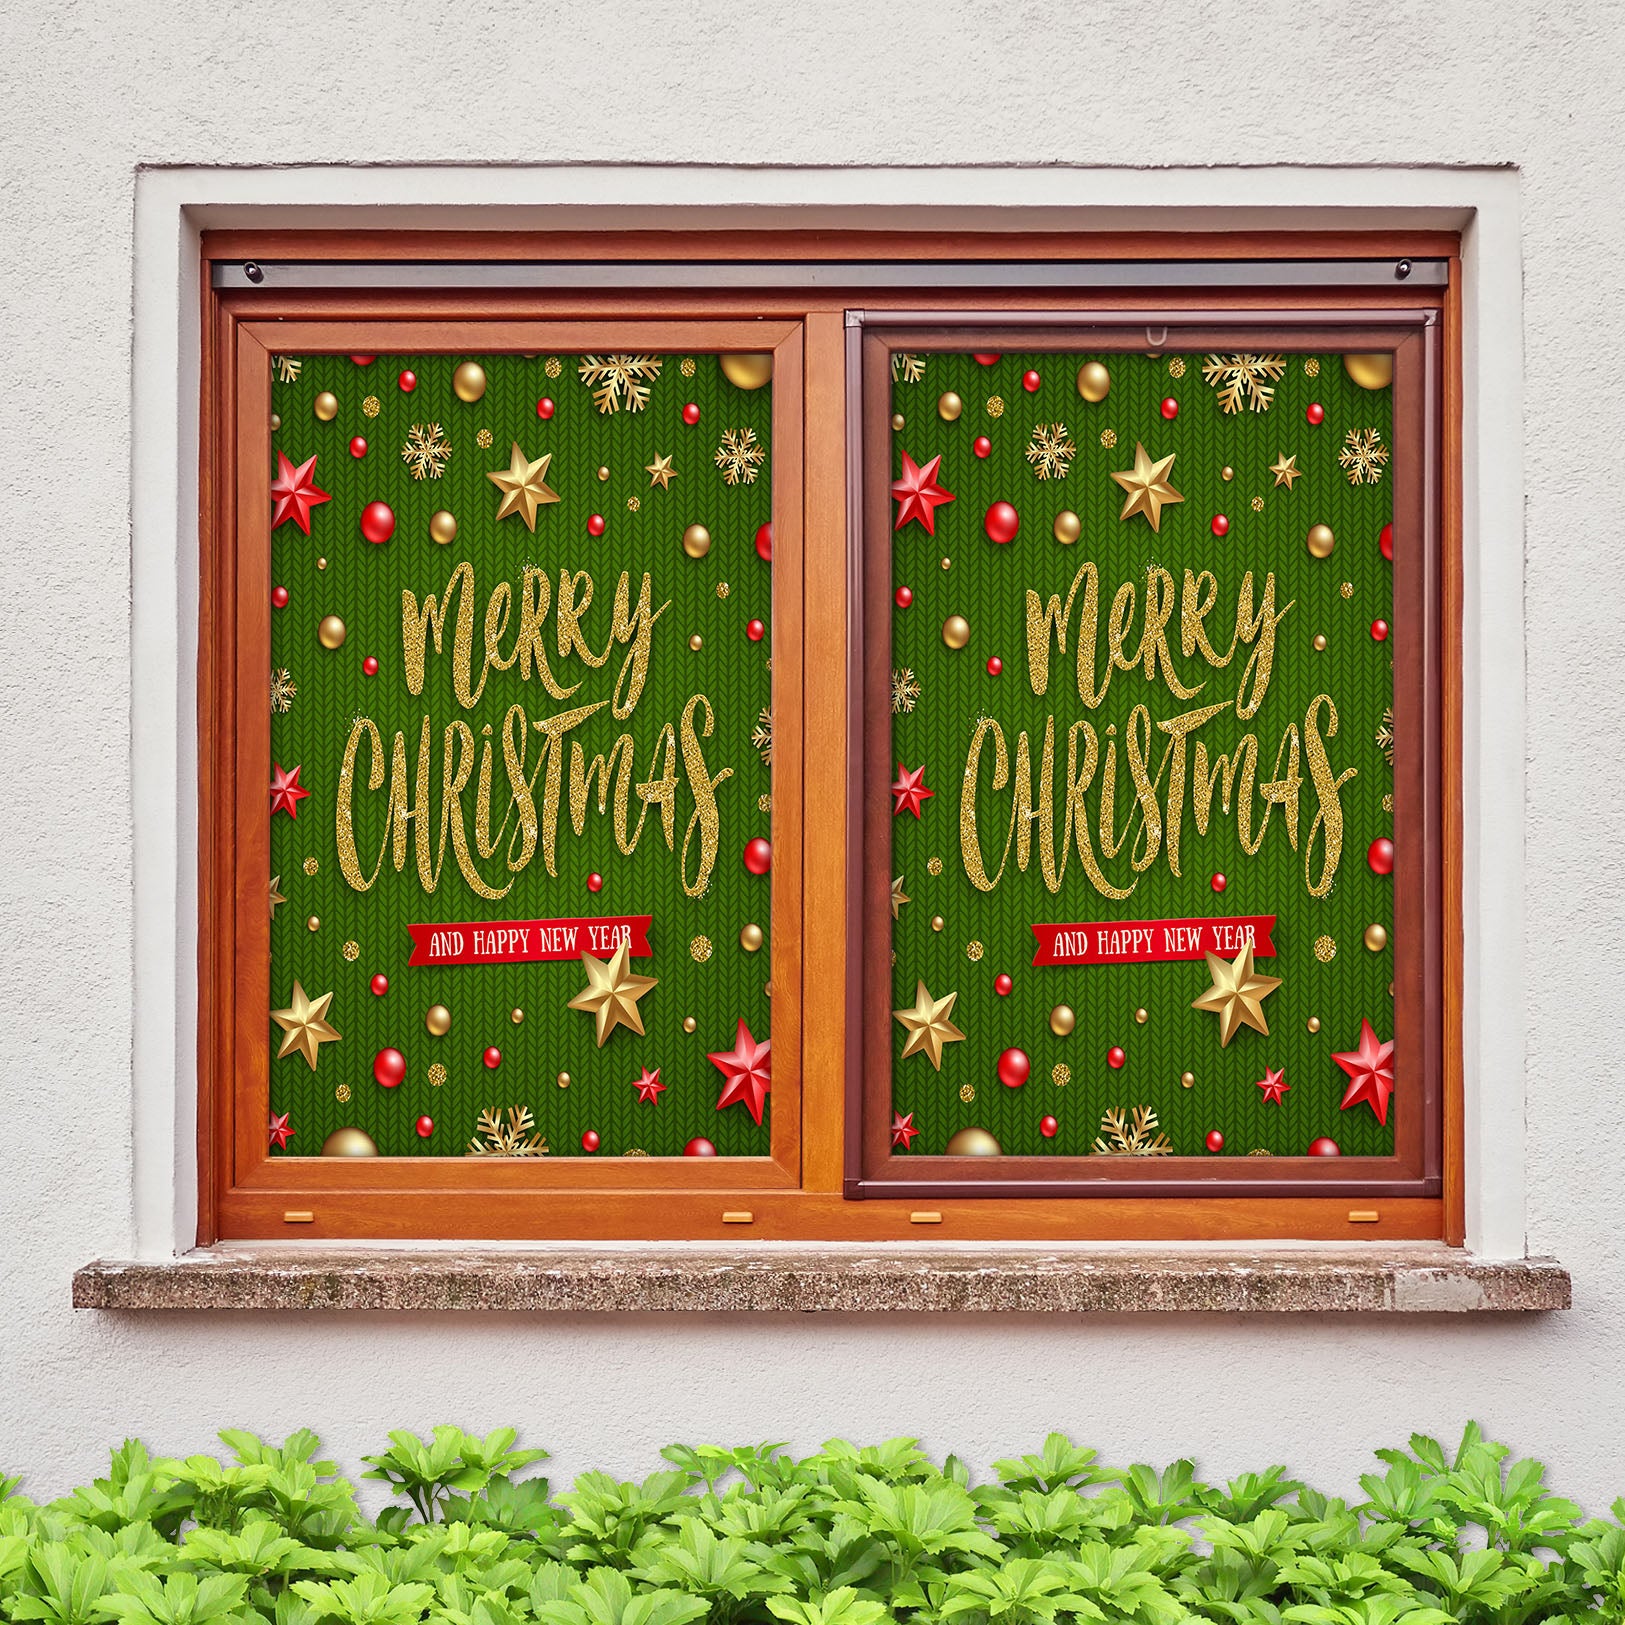 3D Merry Christmas 43121 Christmas Window Film Print Sticker Cling Stained Glass Xmas